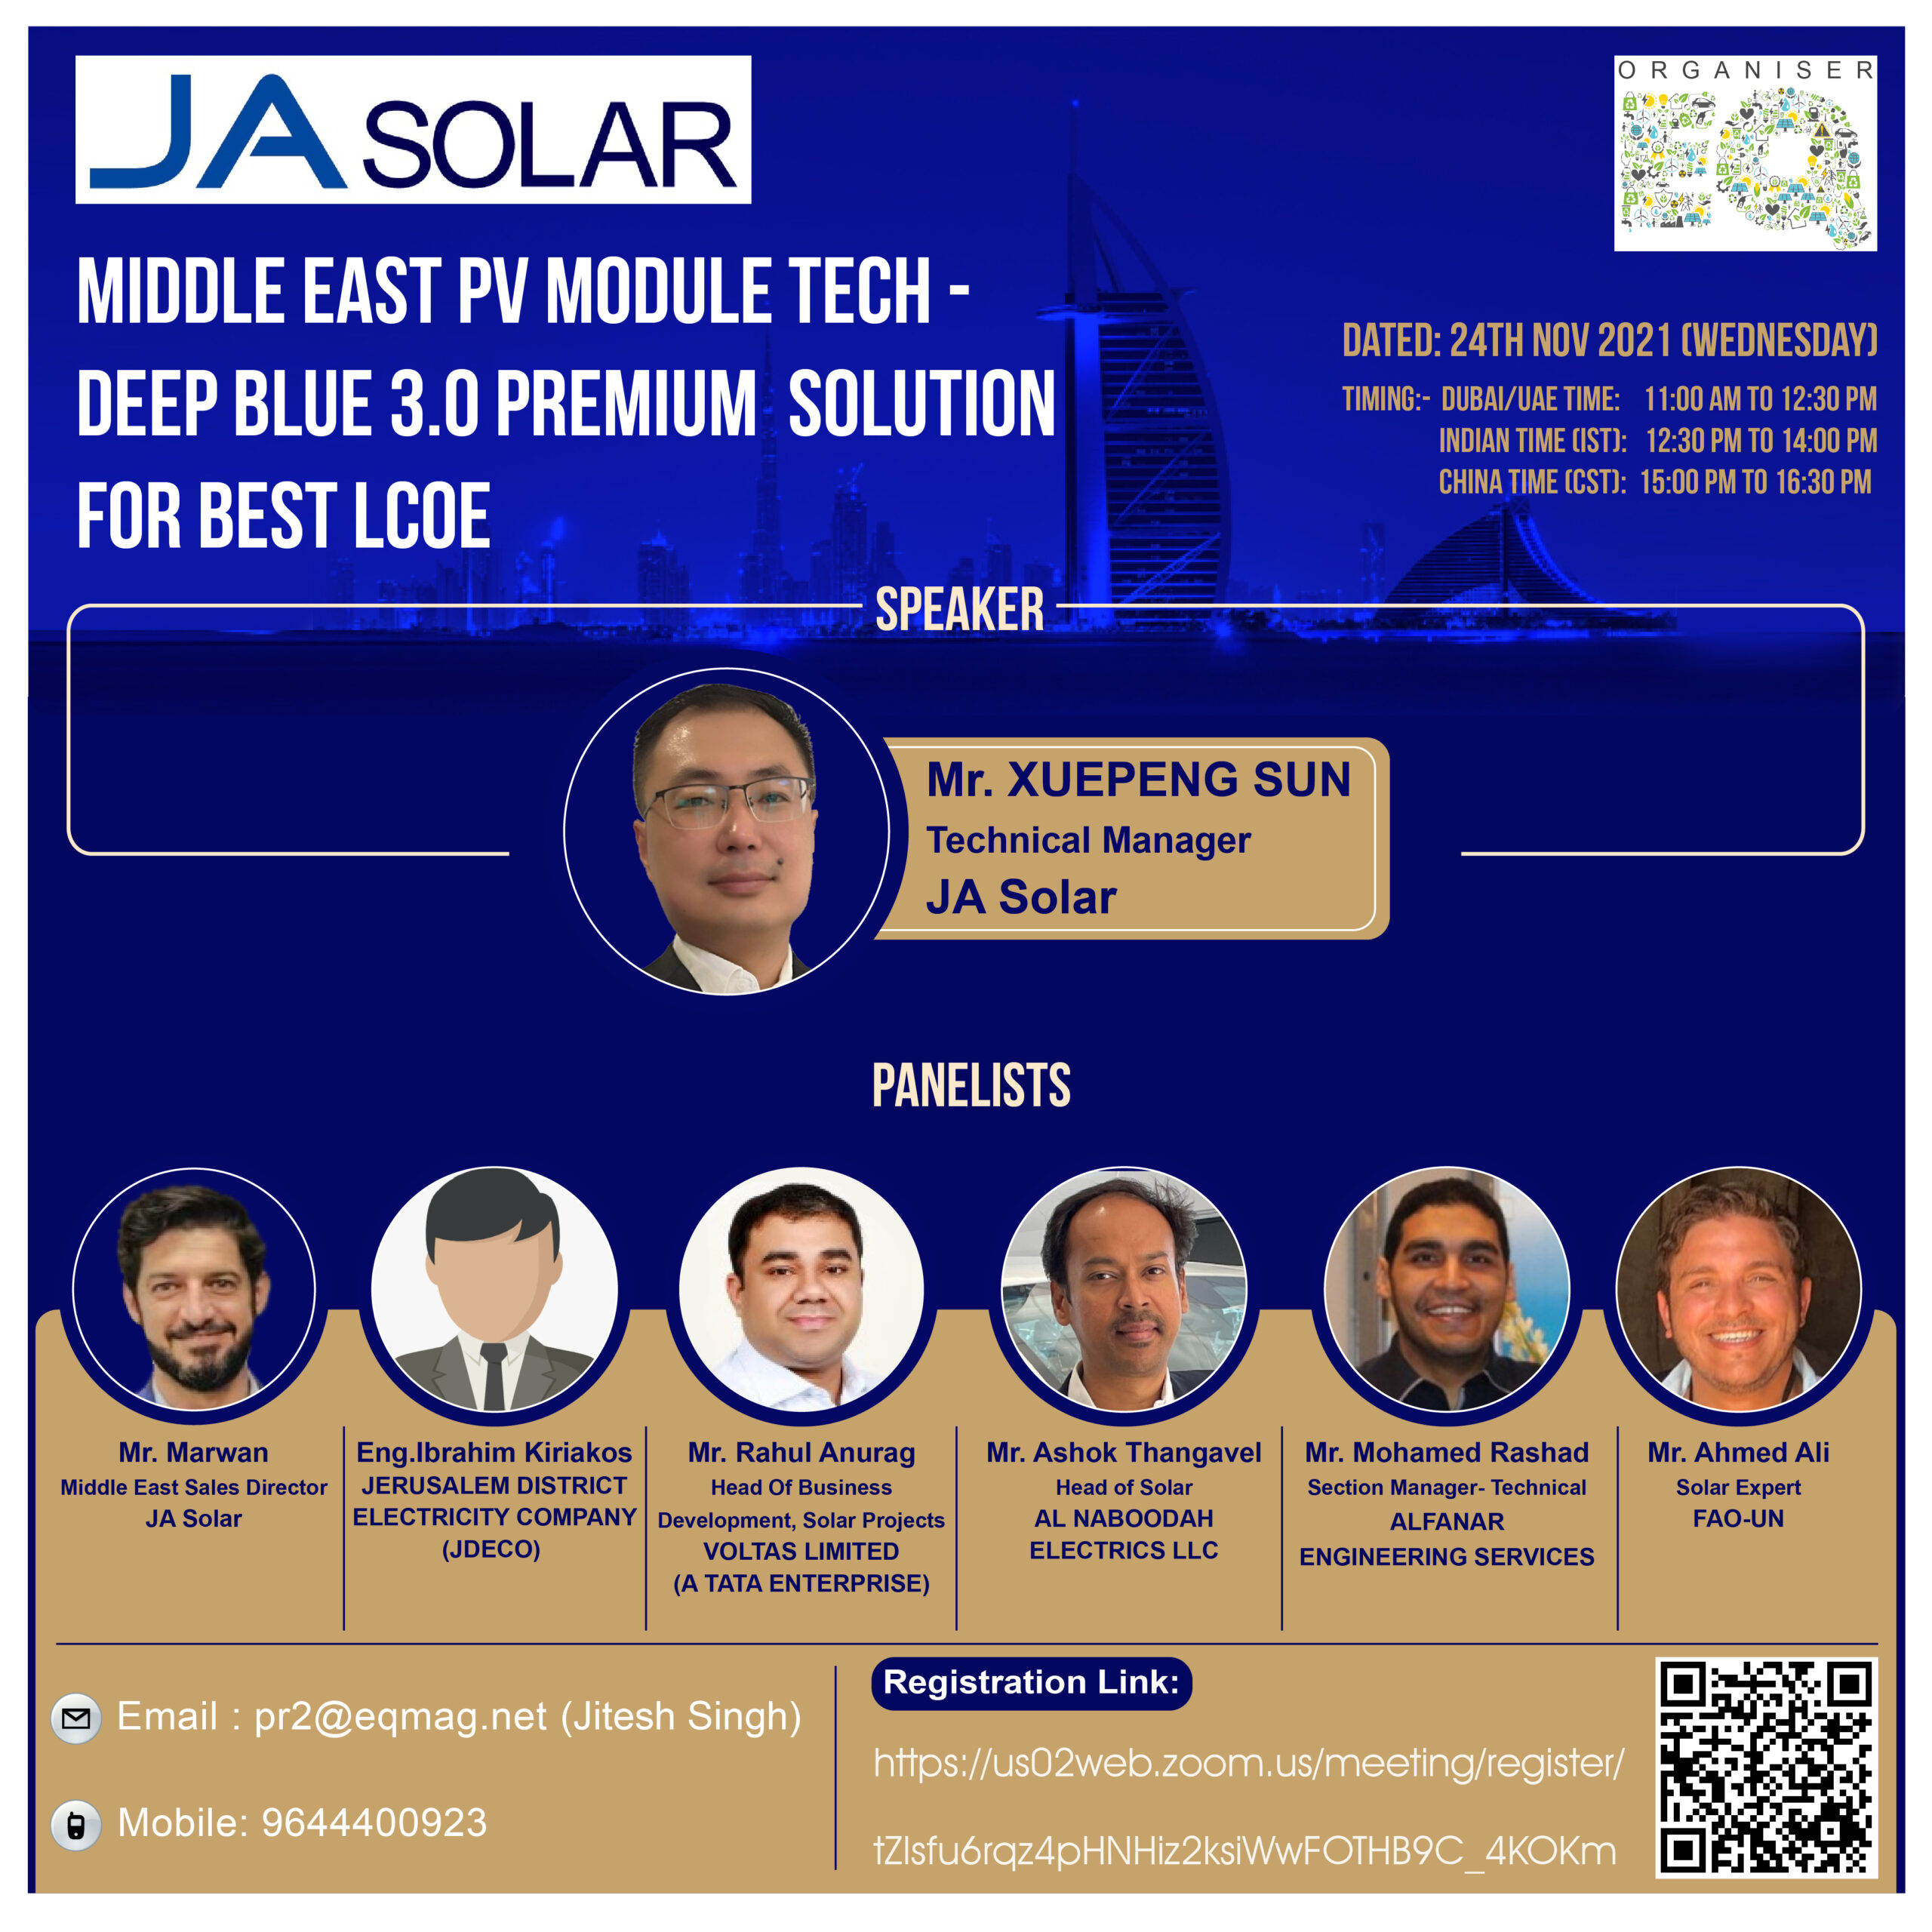 EQ Webinar on Middle East PV Module Tech – Deep Blue 3.0 Premium Solution for Best LCOE Powered by JA SOLAR 24 November 2021(Wednesday) From 11:00 AM Onwards….Registered Now !!!